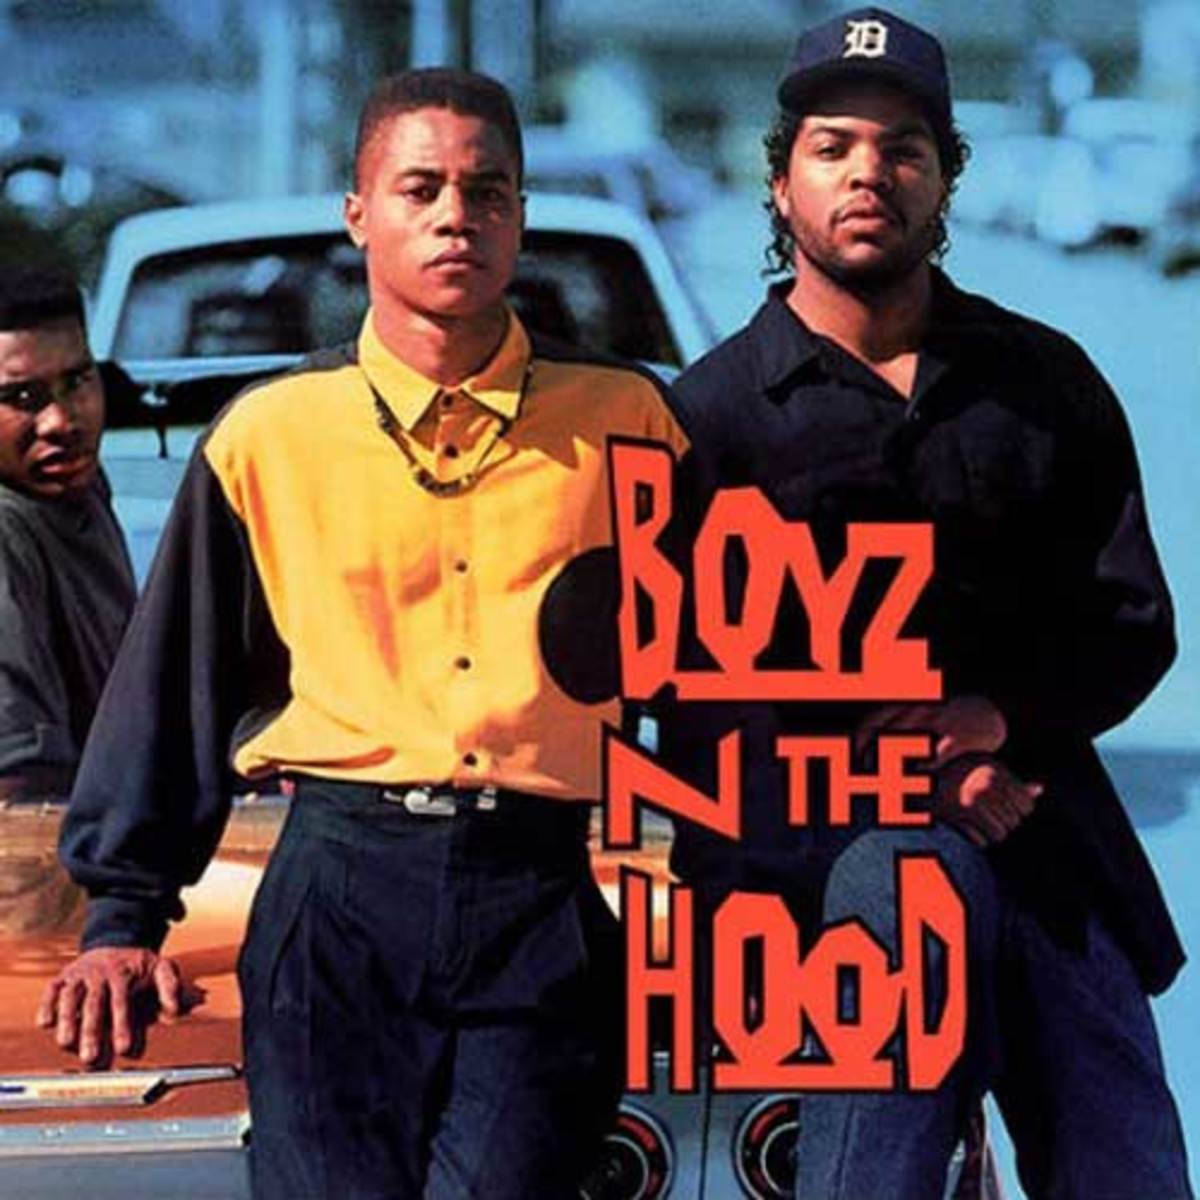 I Say The Hip The Hop The 10 Best Hip-Hop Movies of All-Time - What's Your Favorite? - DJBooth